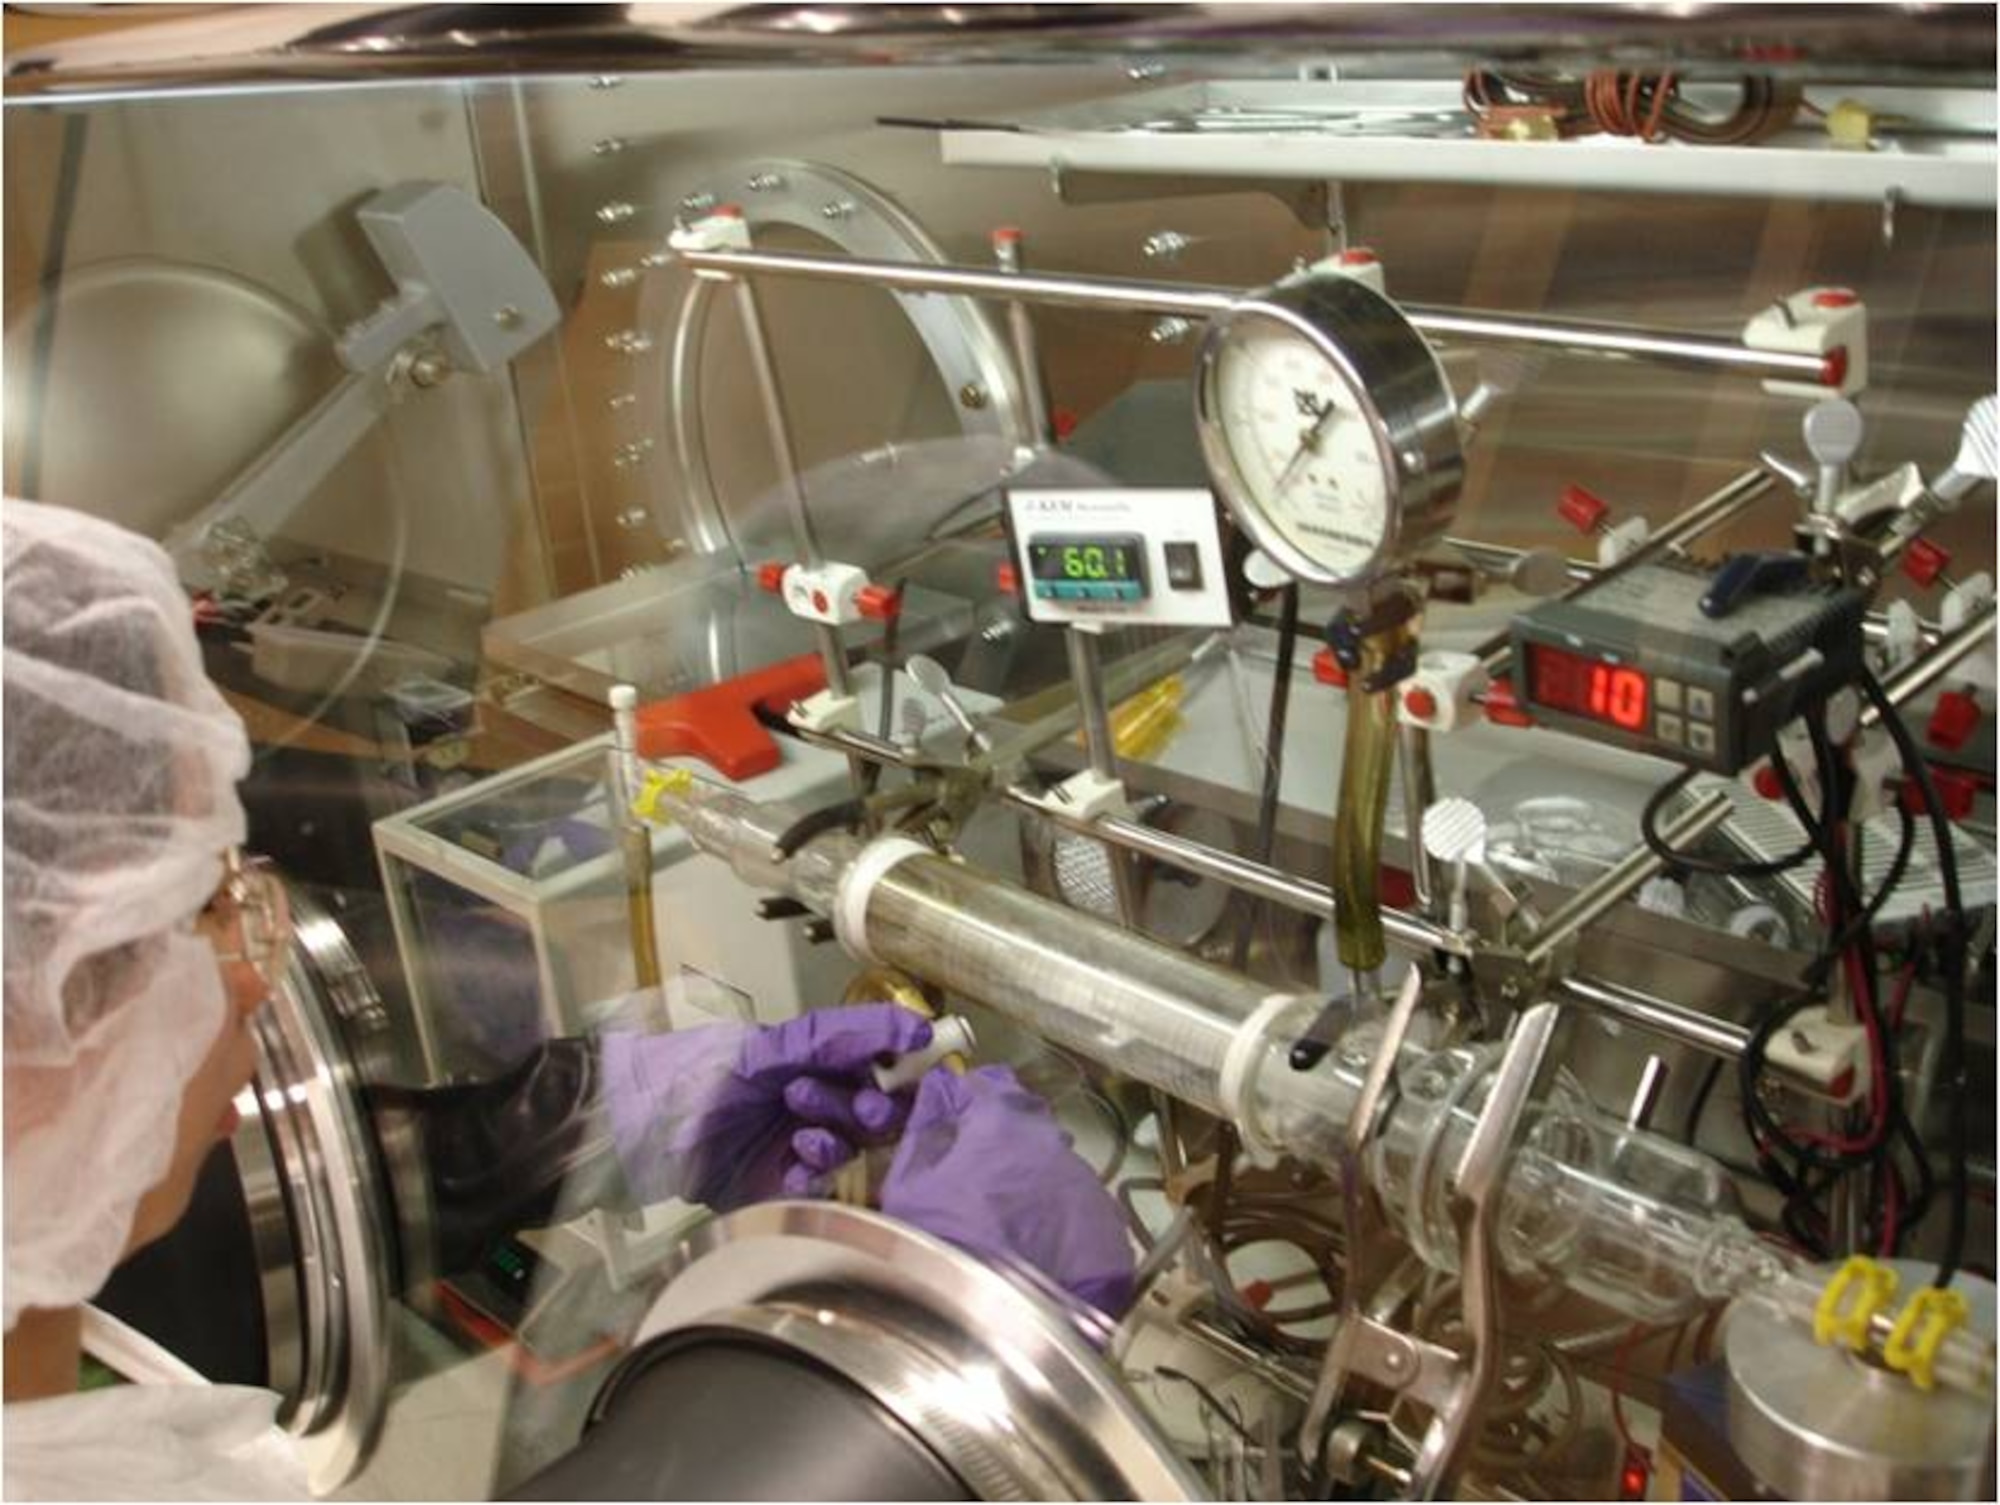 Student Chia-Yi Chen sets up a custom built Chemical Vapor Deposition reactor inside a Vacuum Atmospheres' 'glove box' that maintains an environment that excludes oxygen and moisture. (Credit: Dr. Arthur Epstein, Ohio State University)